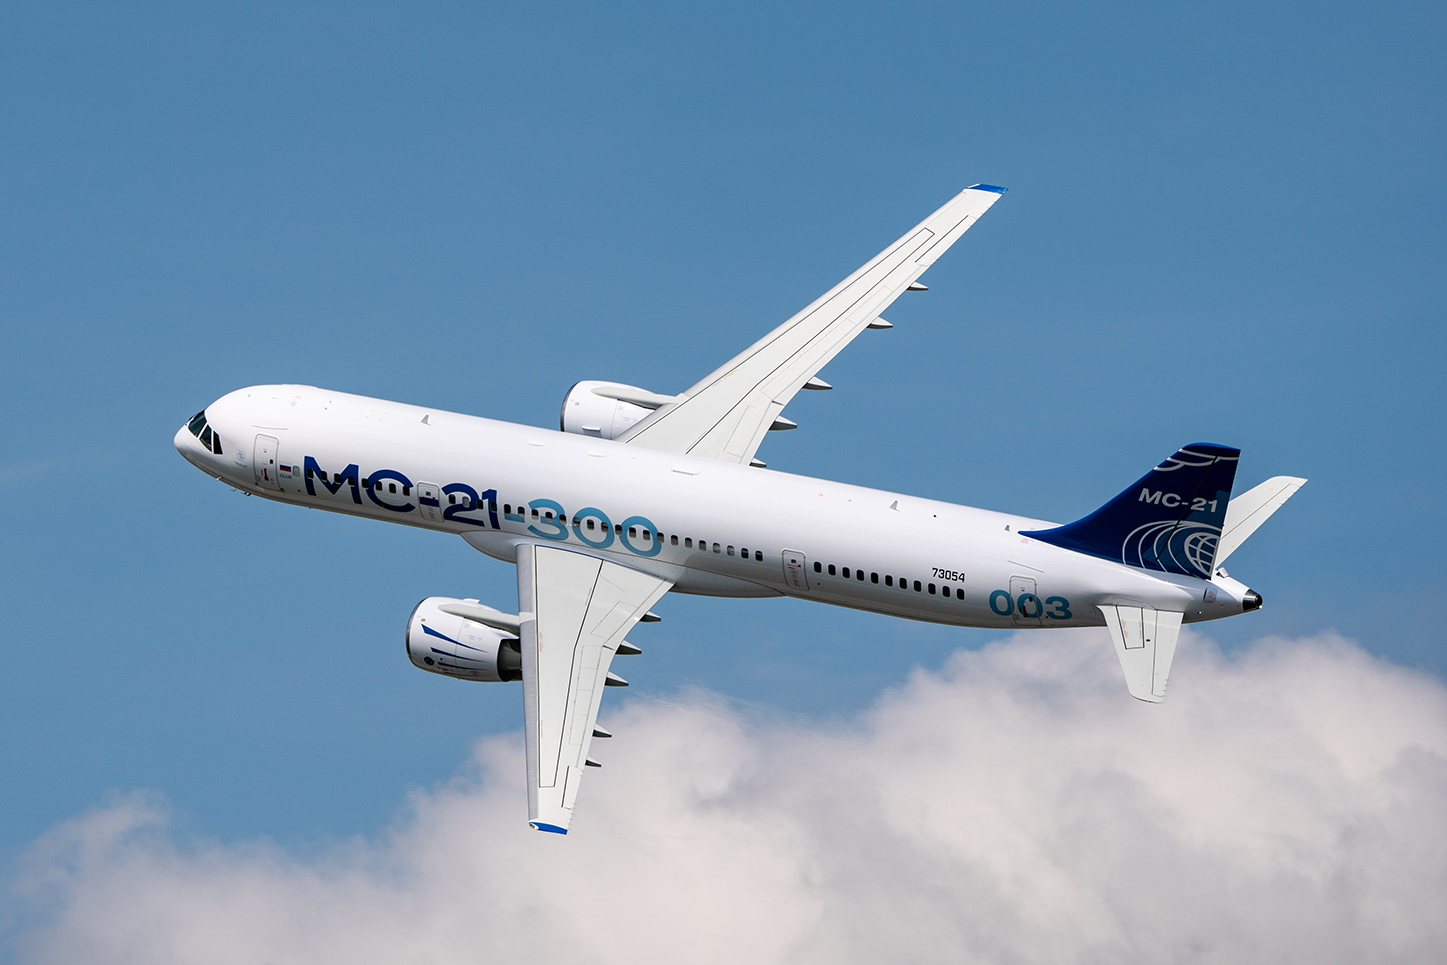 The MC-21-300 passenger plane arrived in Istanbul